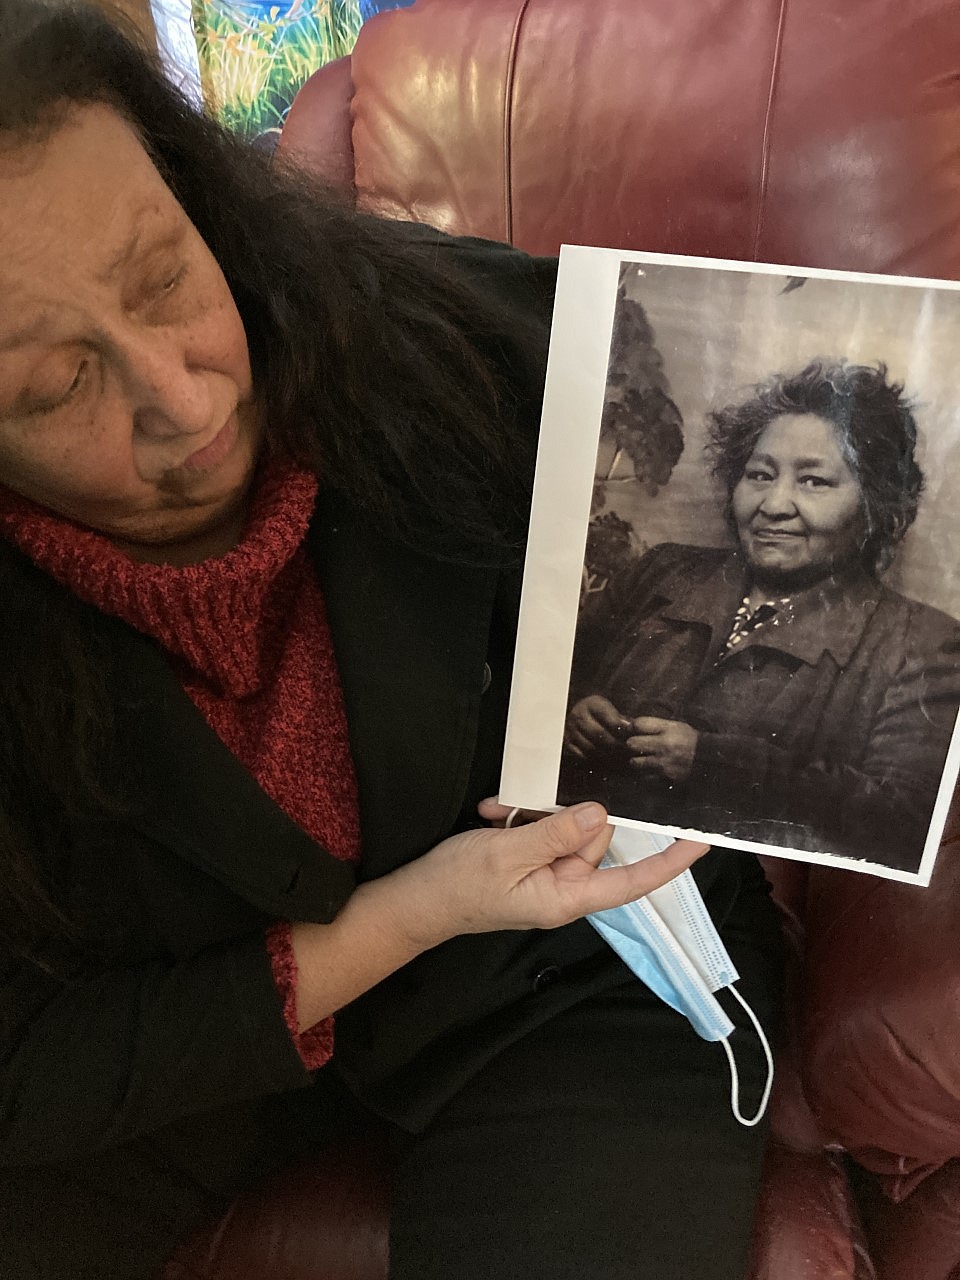 Gen Huitt's aunt, Genevieve Margaret Huitt, a Klamuth Indian, disappeared decades ago. Her charred body, only identifiable by her teeth, was found in a burned car. (Carolyn Hidy/Lake County Leader)